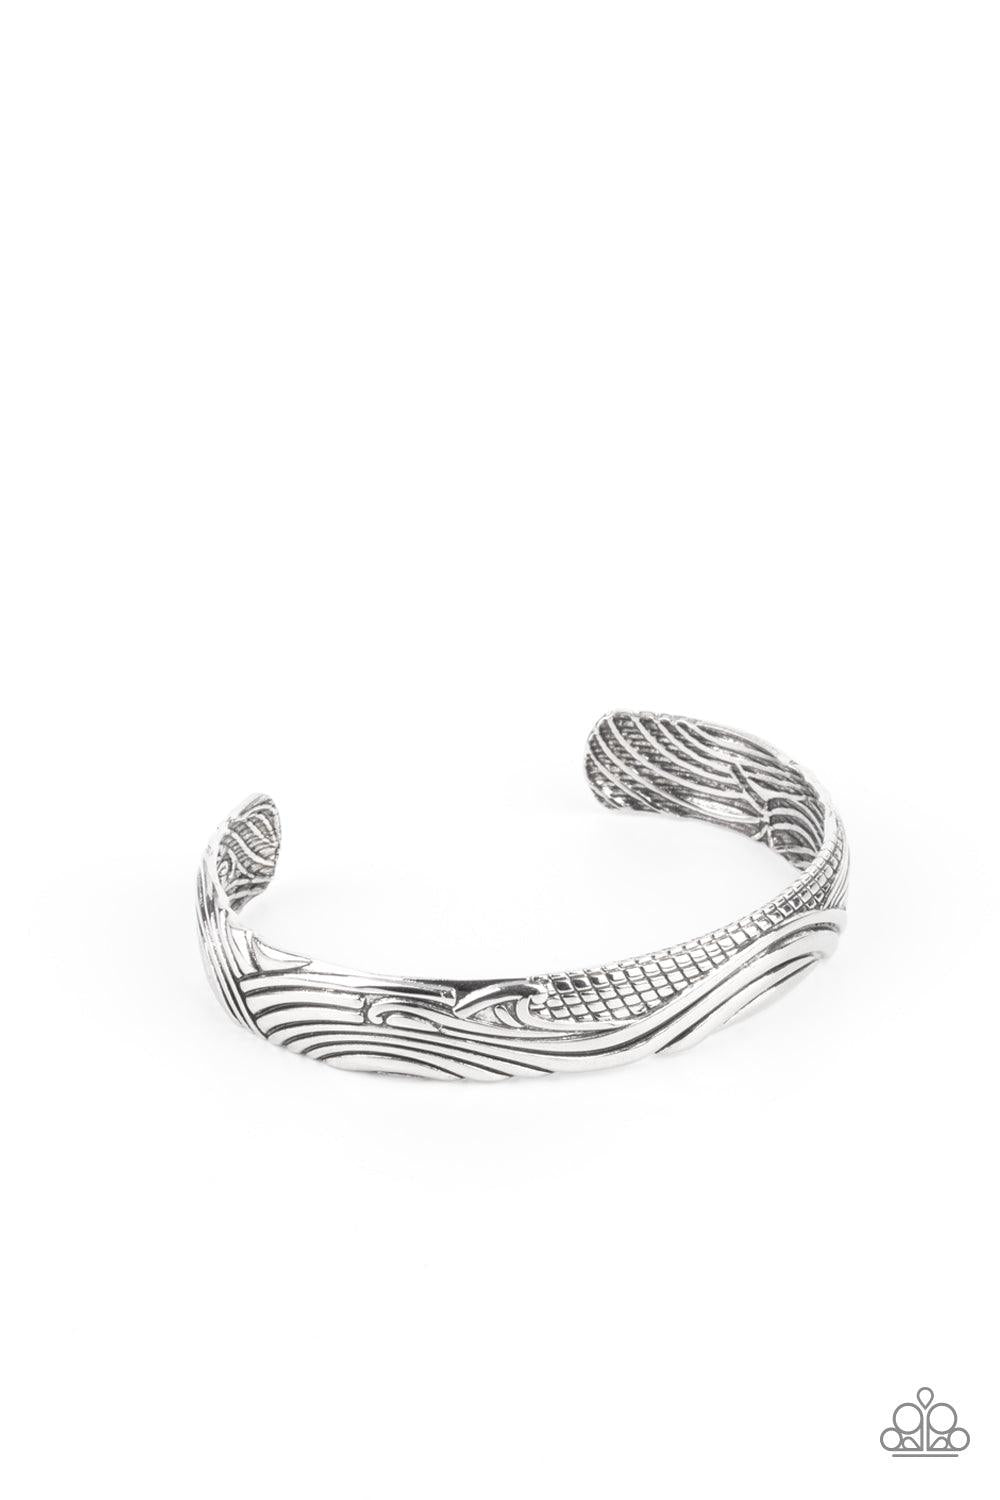 Paparazzi Accessories Tidal Trek - Silver Billowing with wave-like and sections of geometric texture, an embossed silver cuff curls around the wrist for a seasonal look. Sold as one individual bracelet. Bracelets